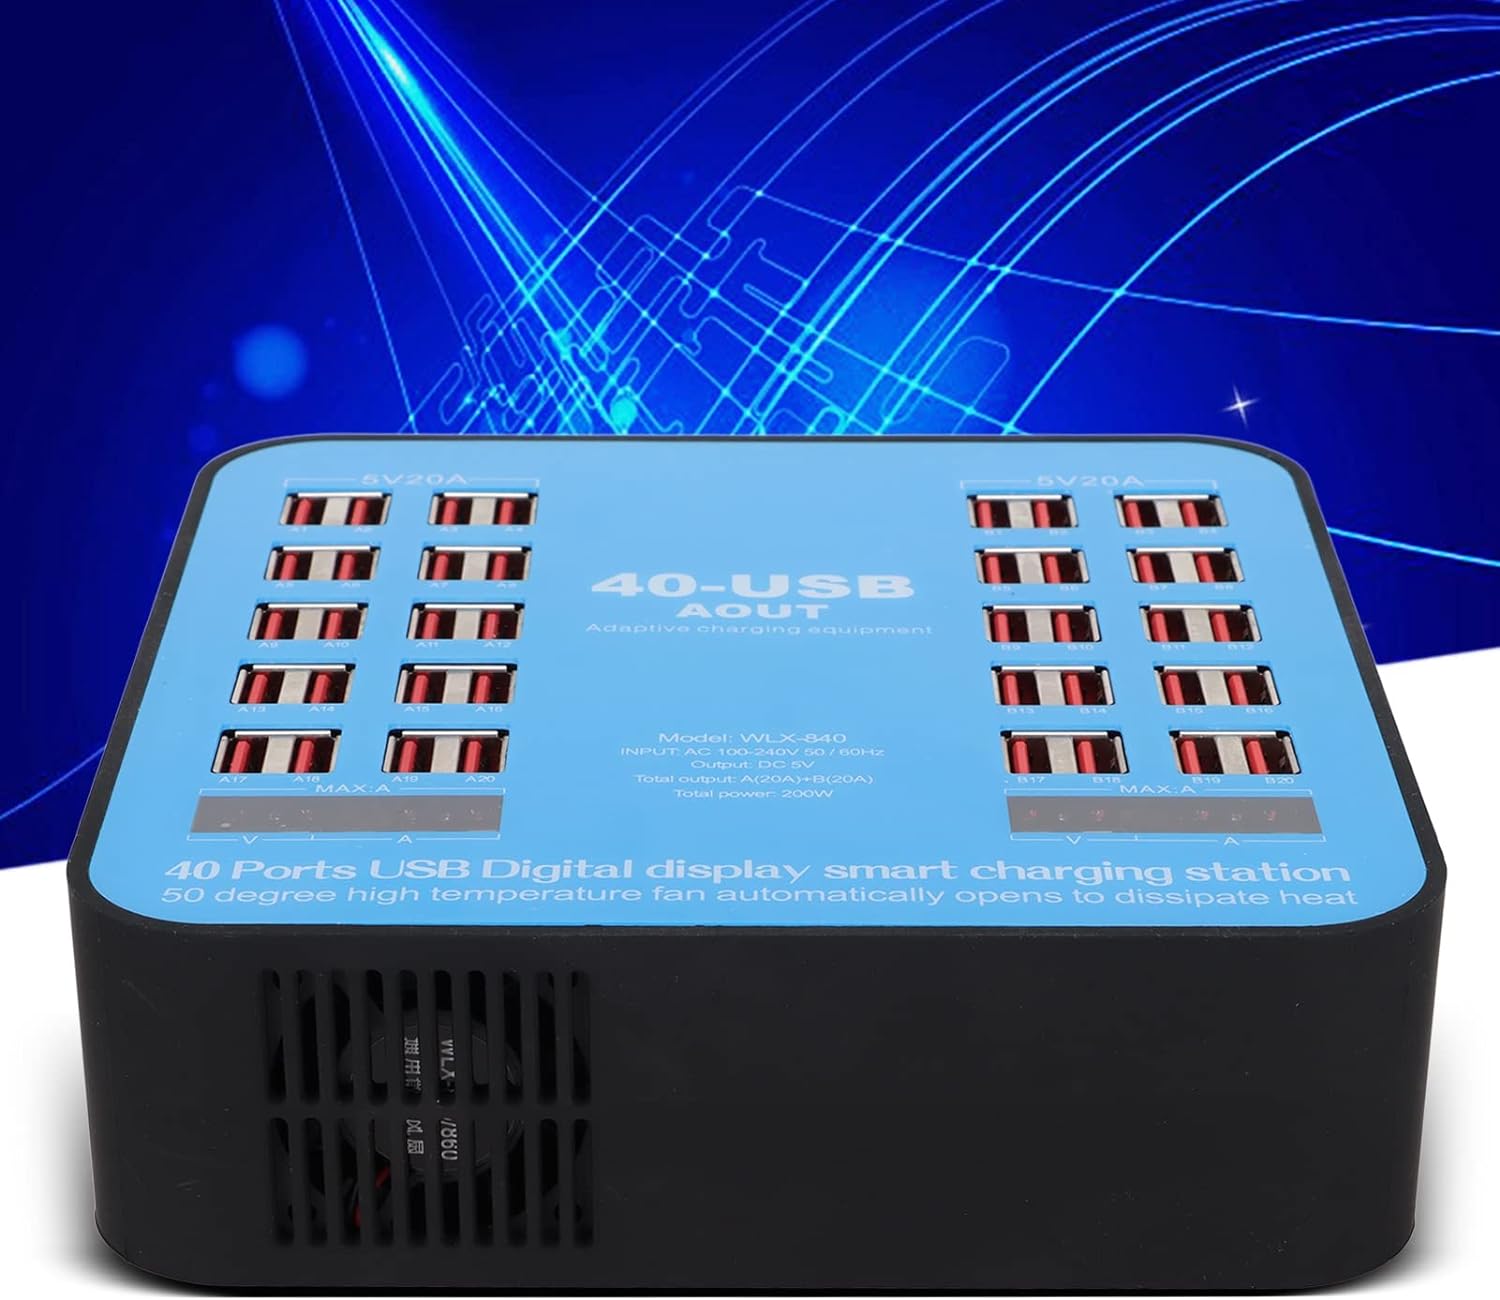 200W Universal Multiport Charging Station with 40 Ports, LCD Digital Display for Current and Voltage, Complete with Organizer Stand - Office Catch